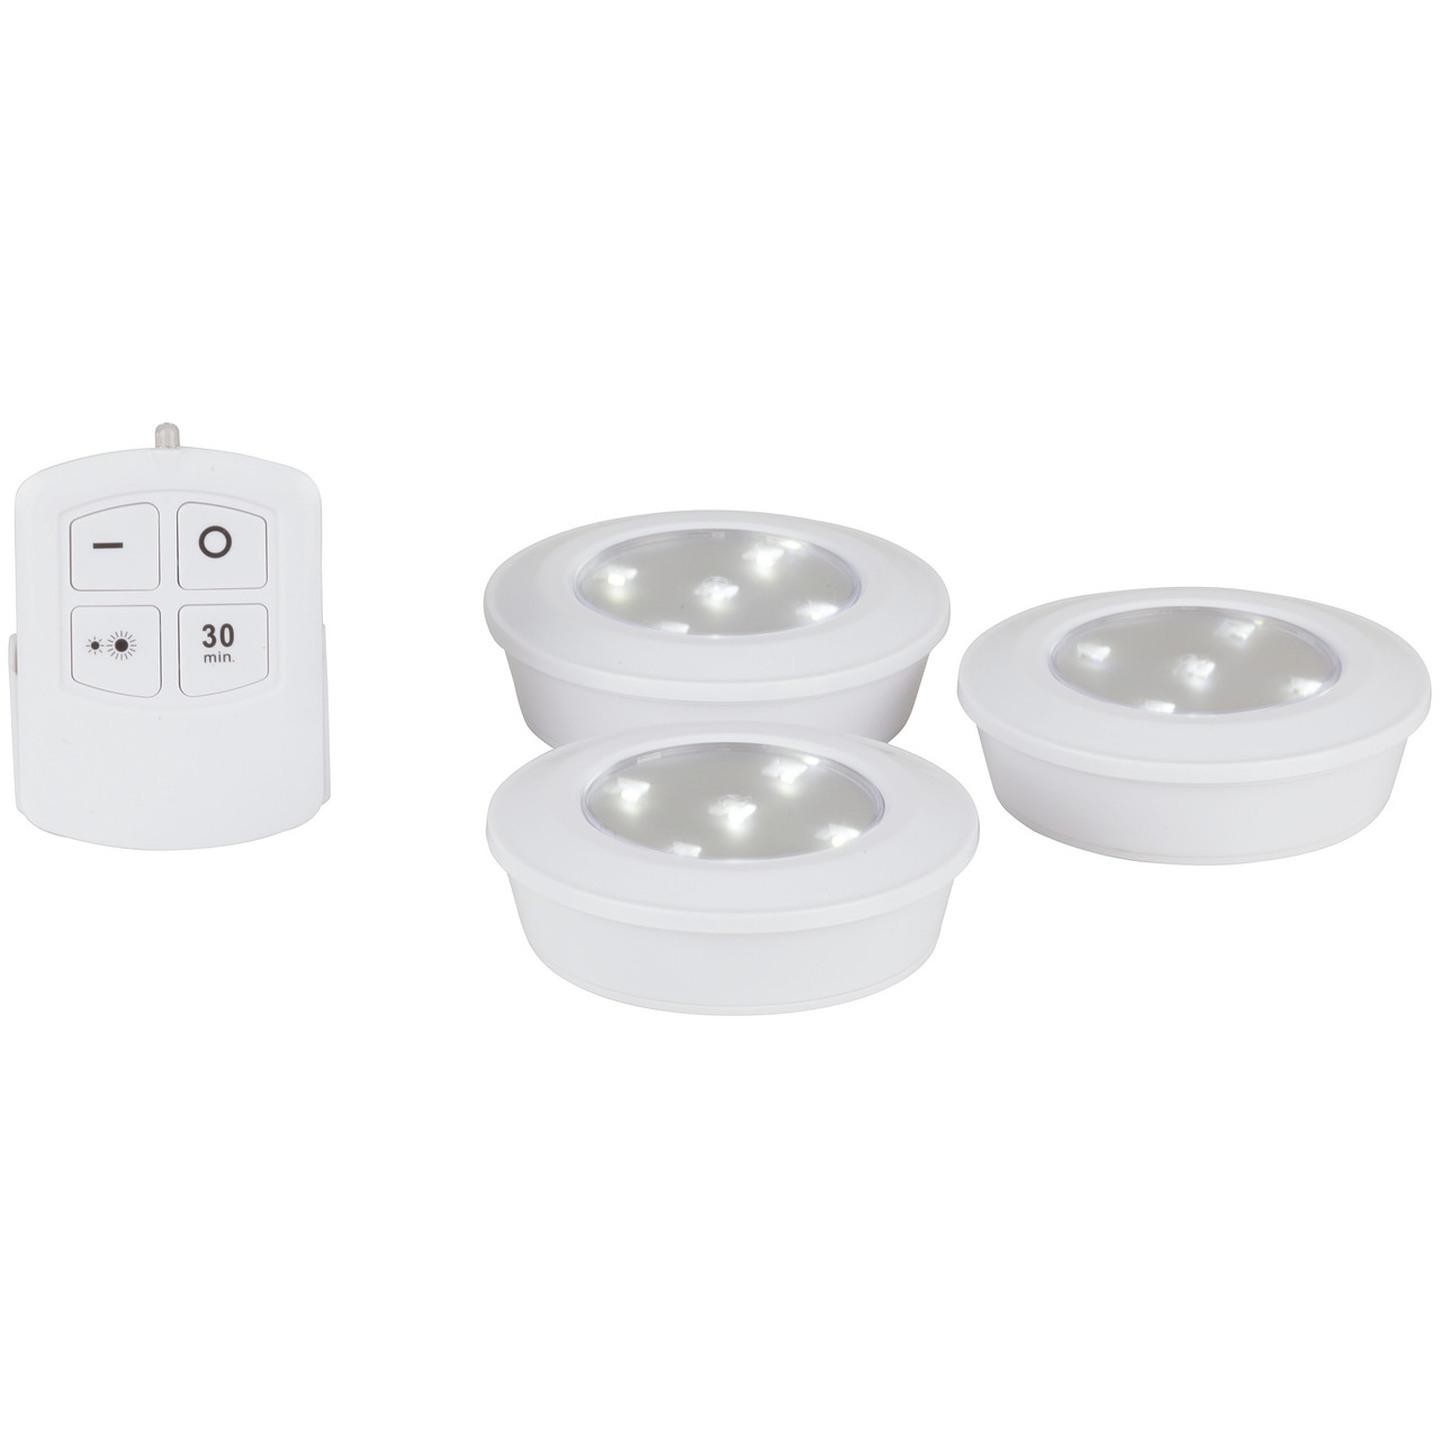 Remote Controlled LED Puck Light Triple Pack